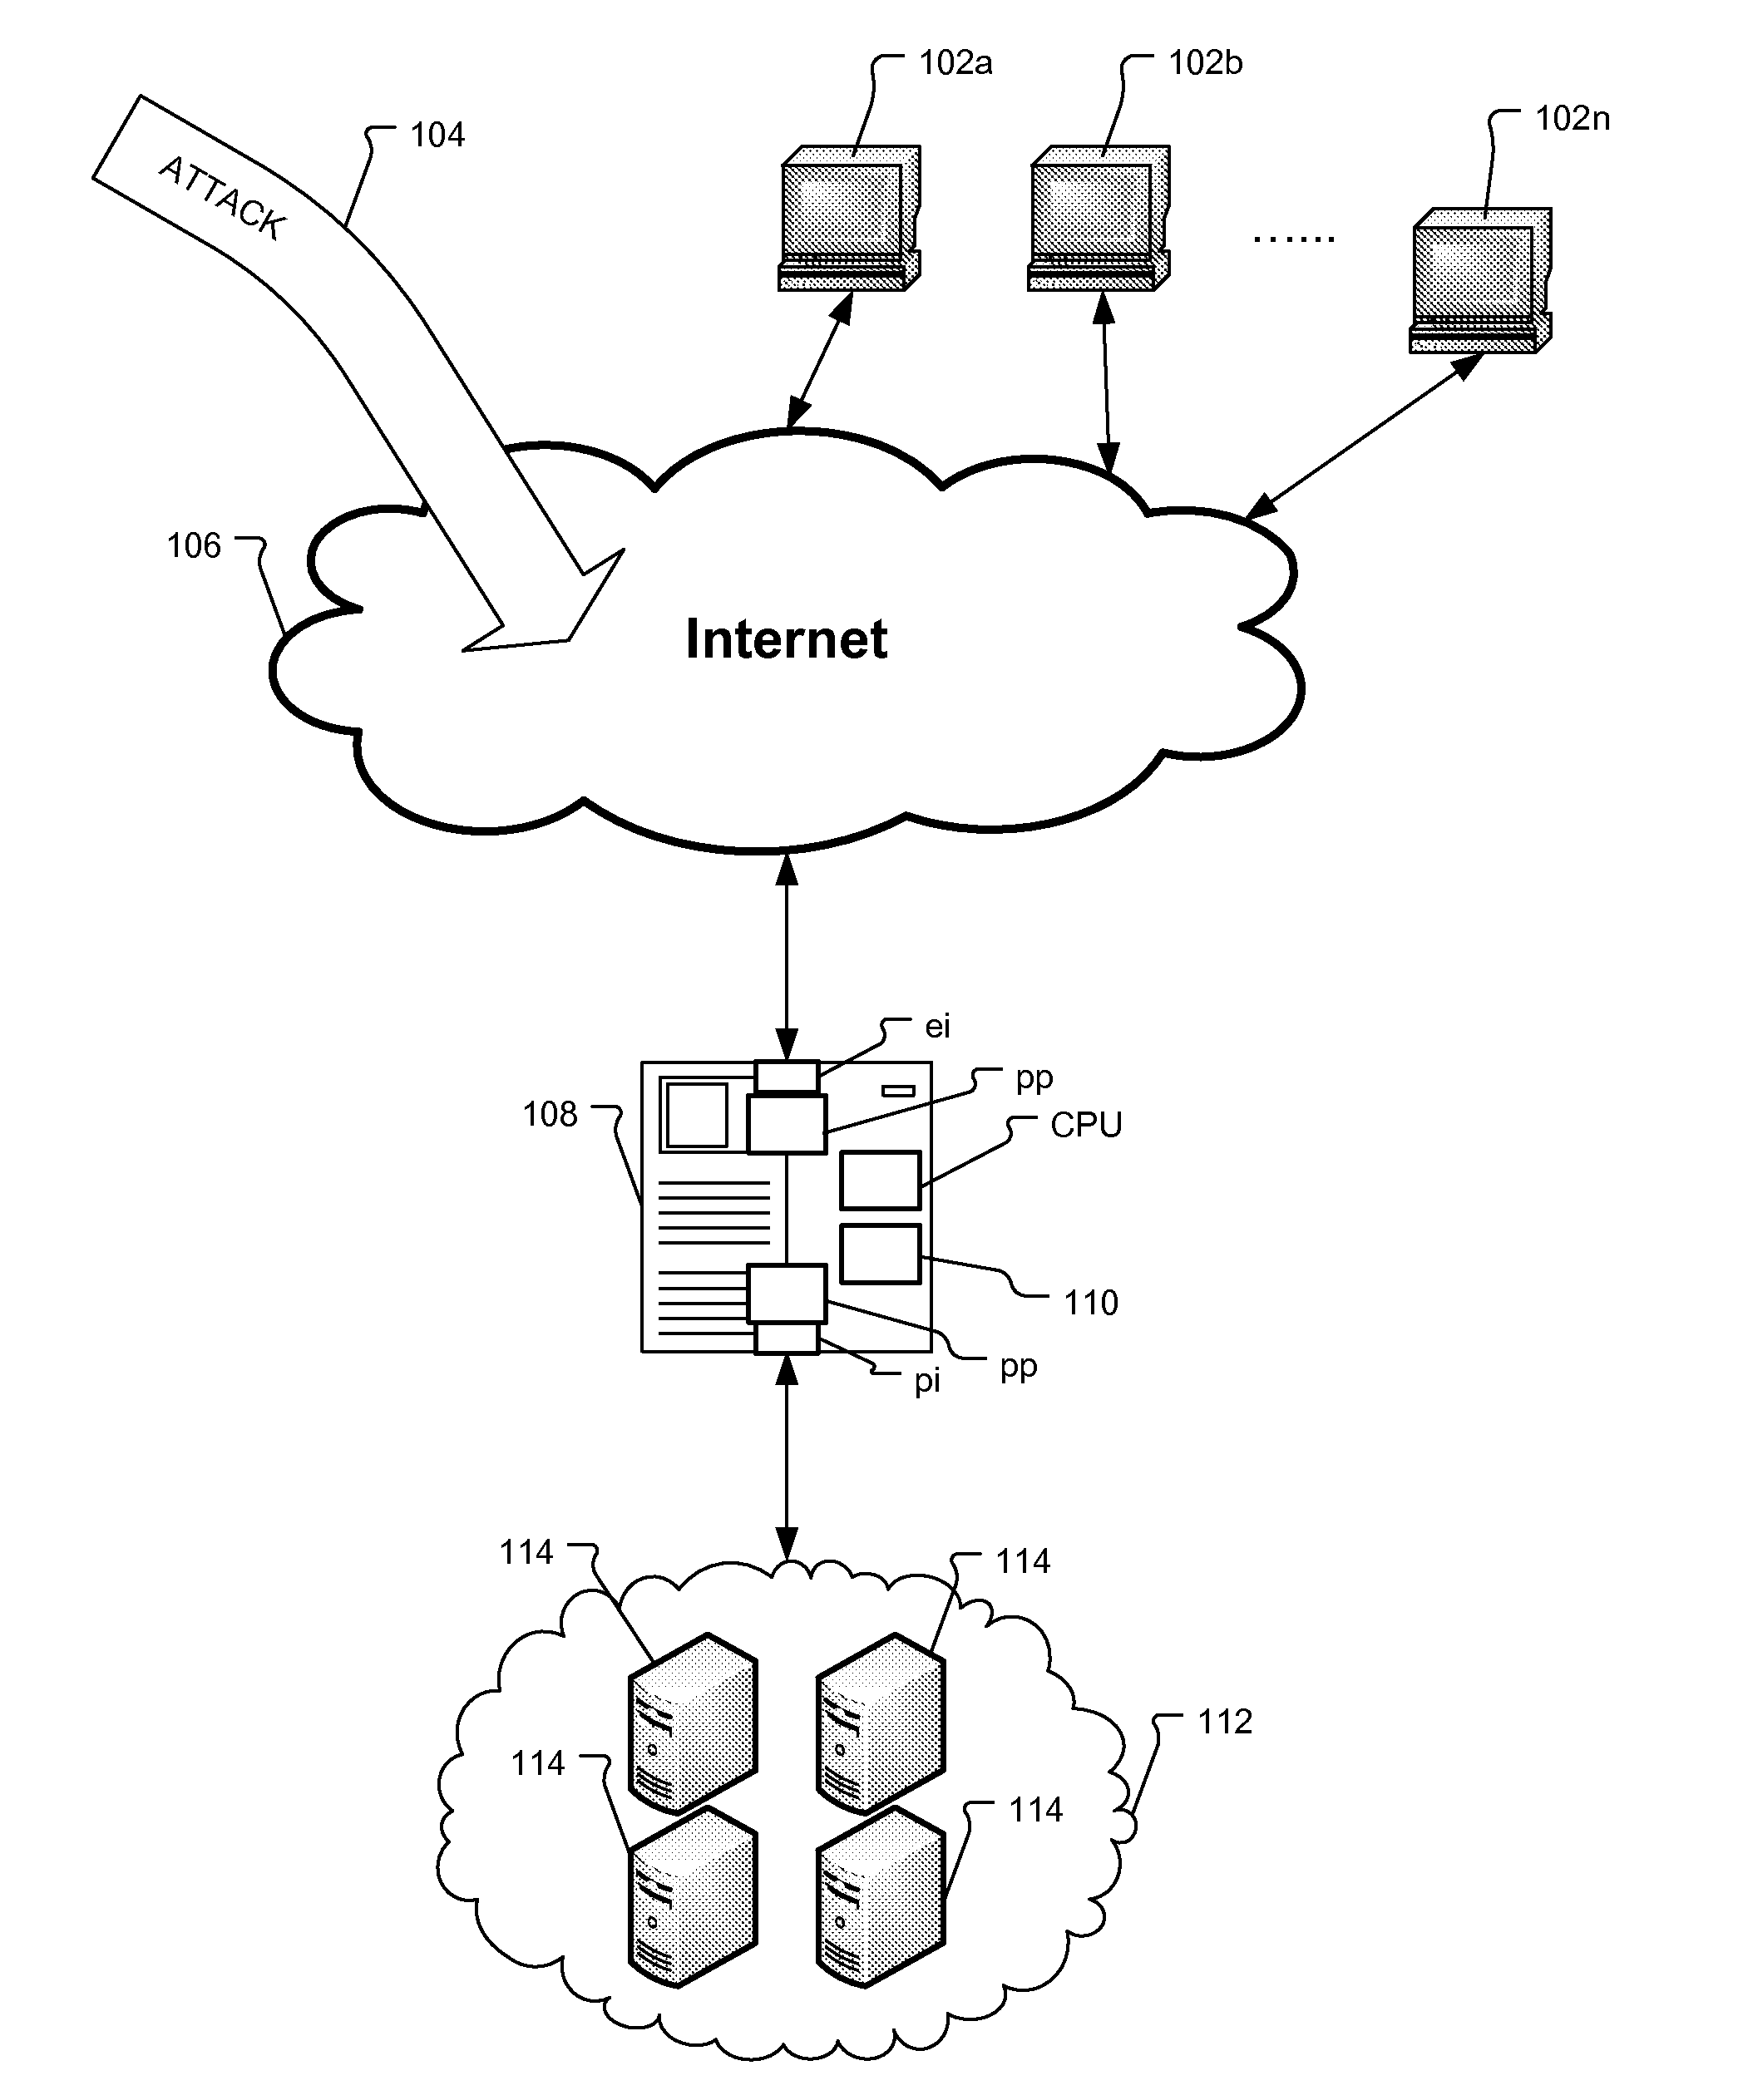 Method and Protection System for Mitigating Slow HTTP Attacks Using Rate and Time Monitoring